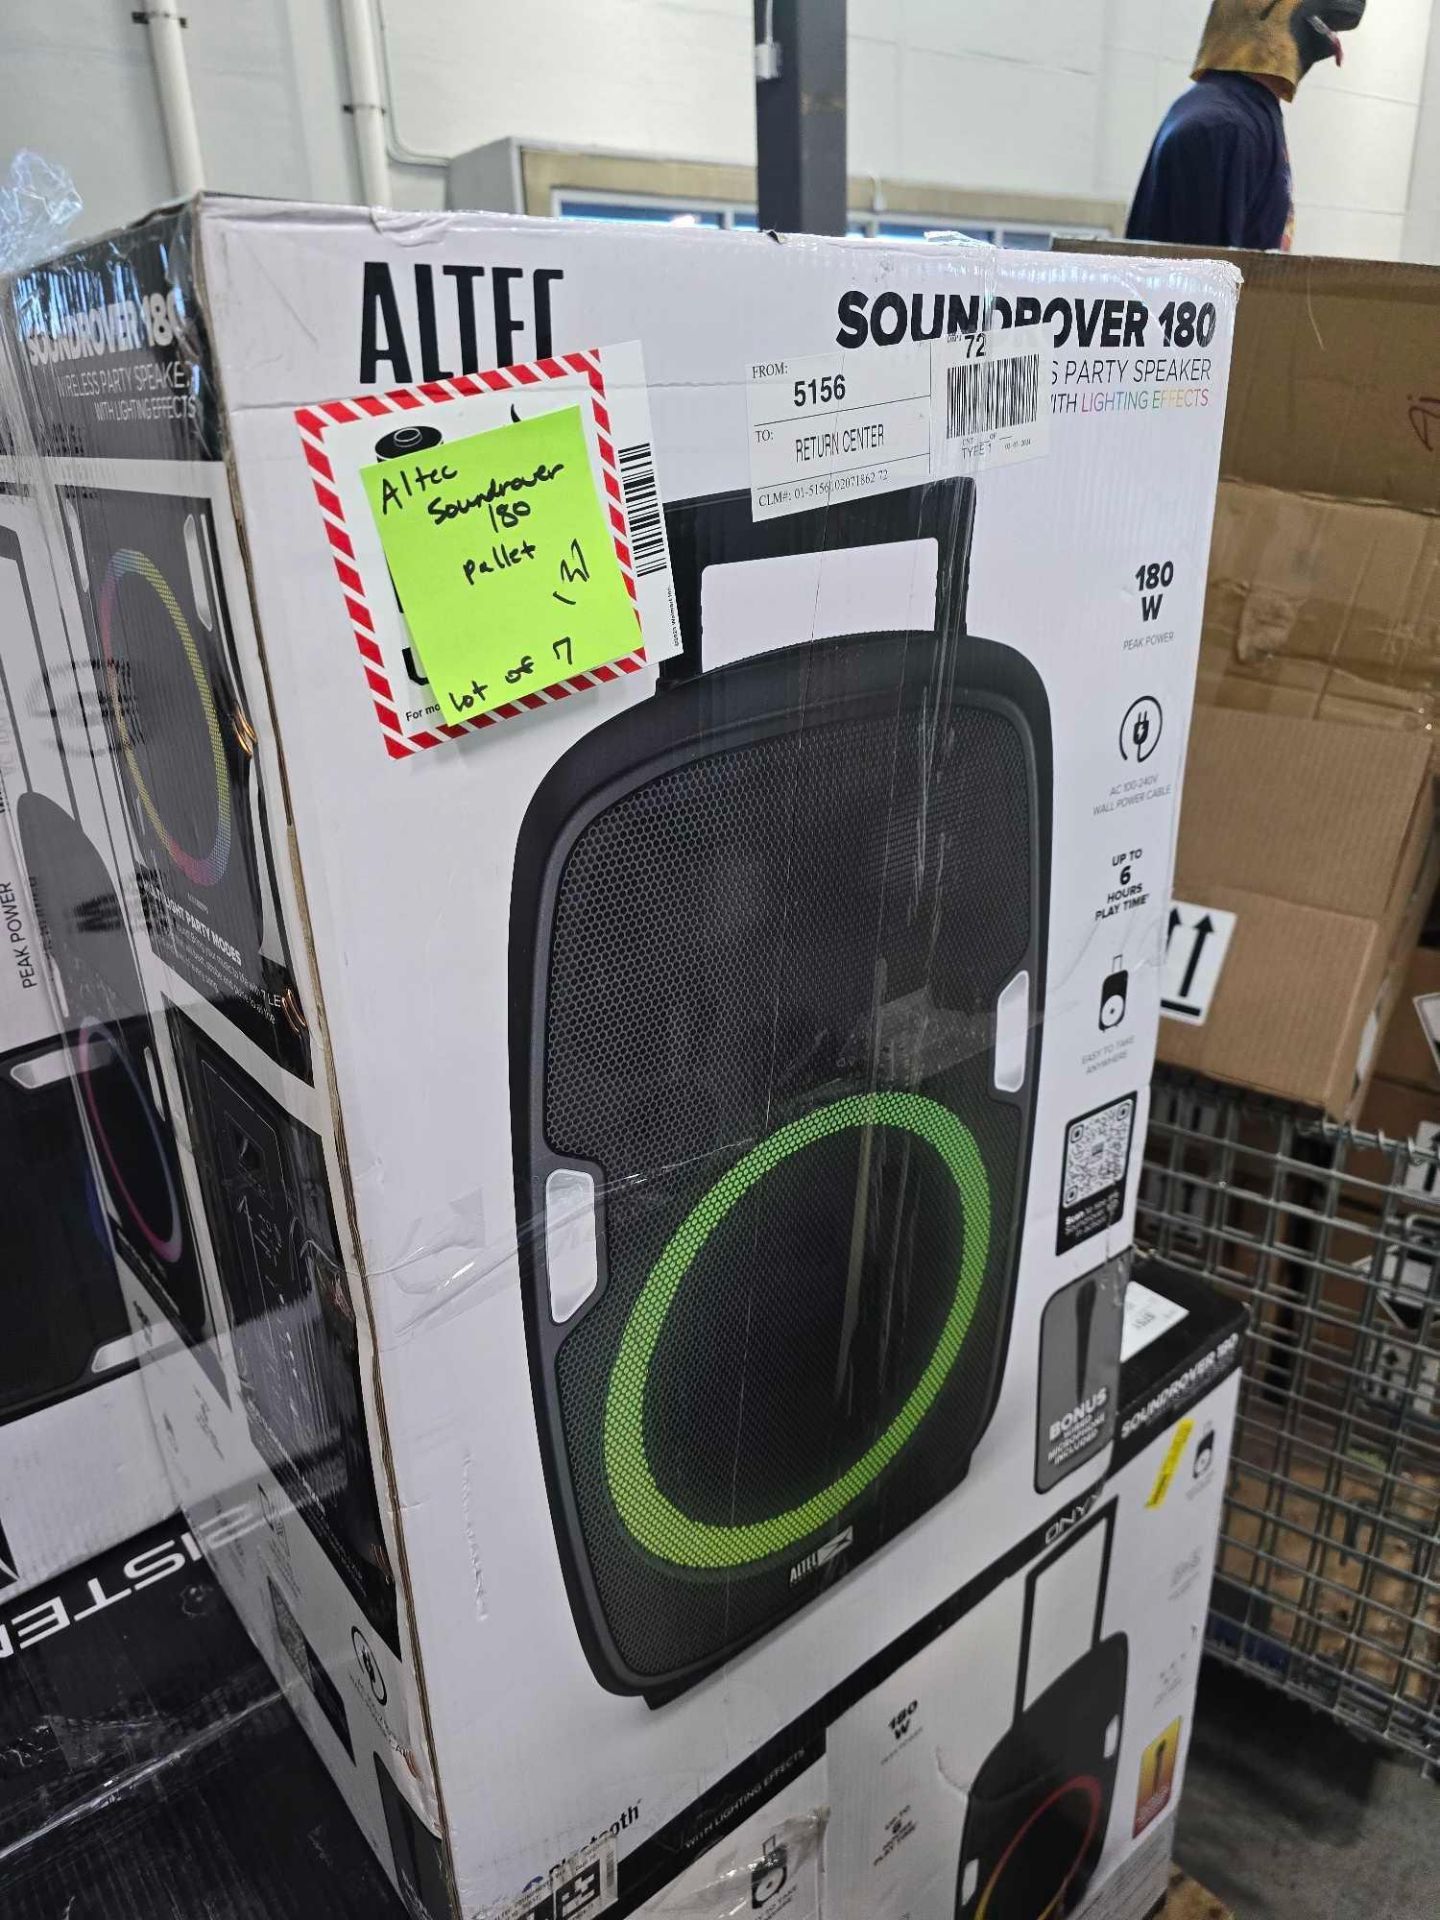 7 Altec Lansing soundrover 180 Bluetooth party speakers - Image 2 of 3